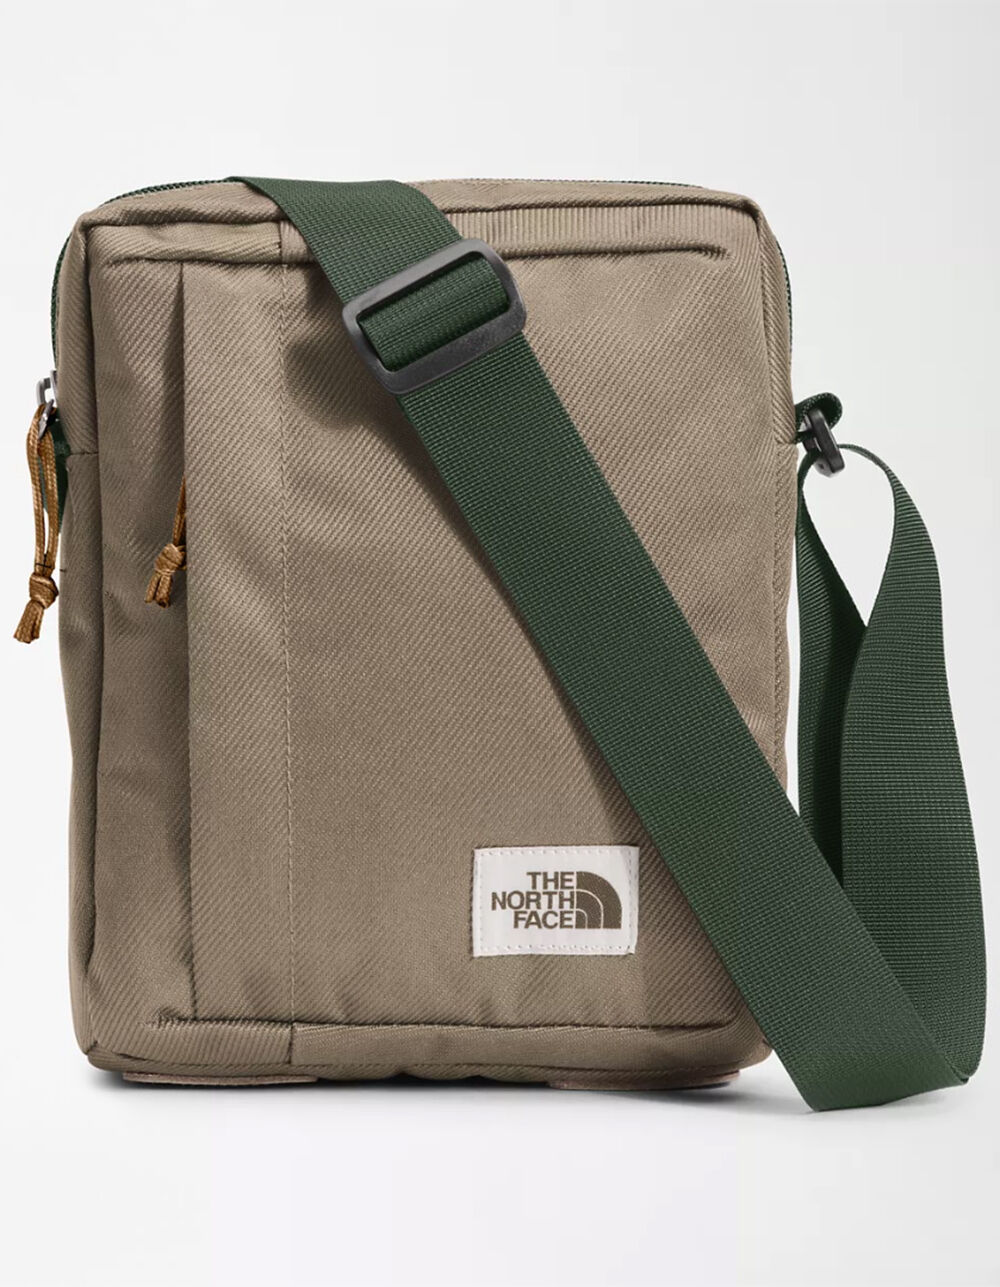 THE NORTH FACE Cross Body Bag - NATURAL | Tillys